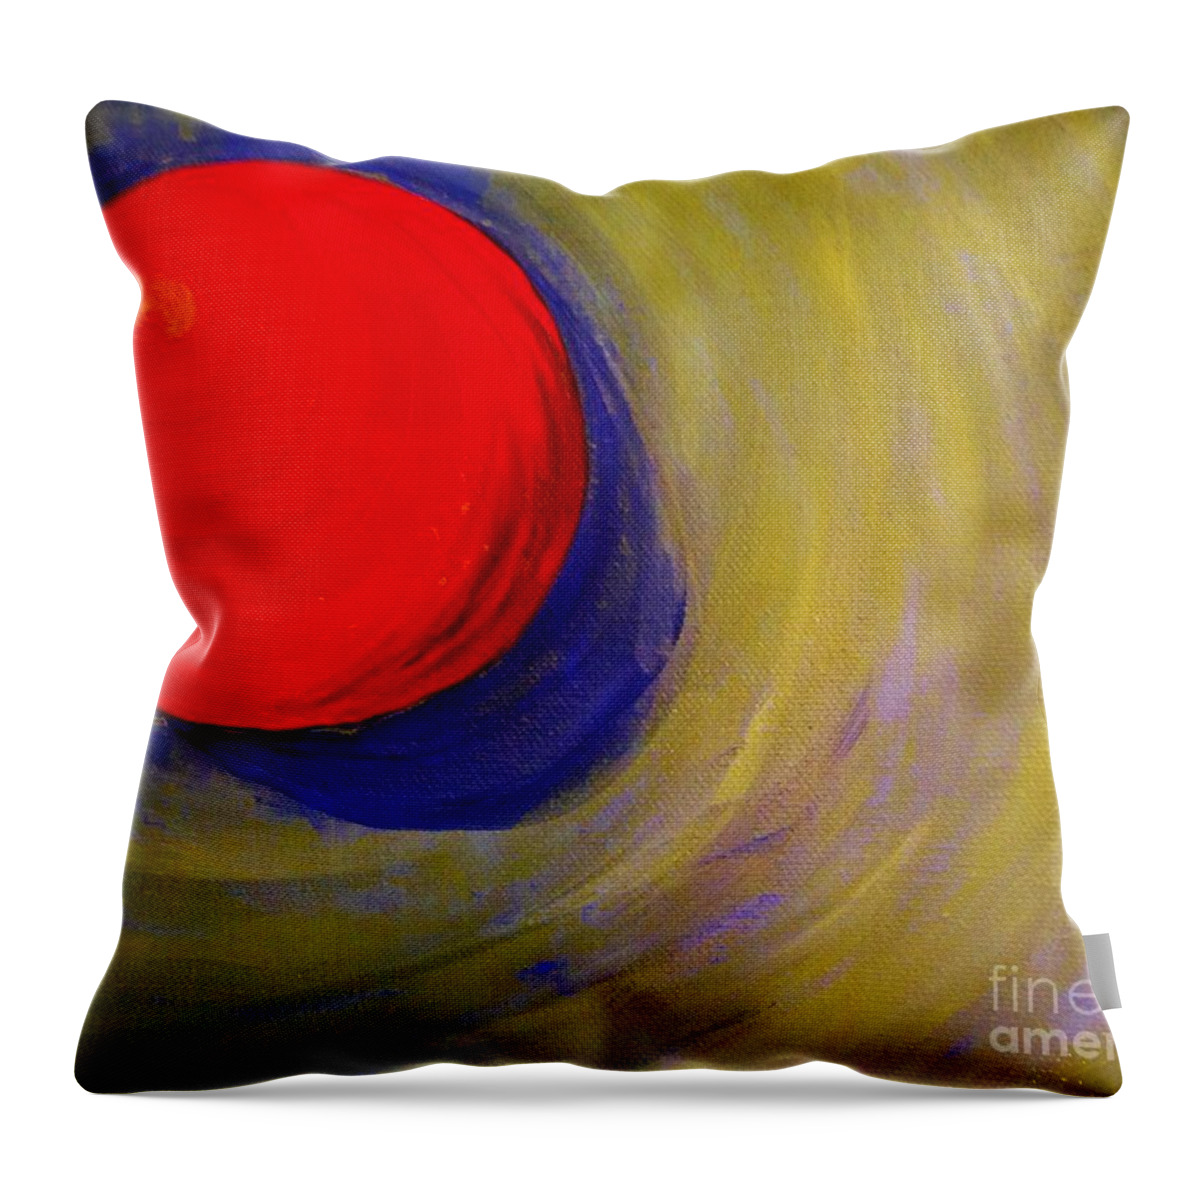 Primary Colors Throw Pillow featuring the painting Fireball by Brigitte Emme